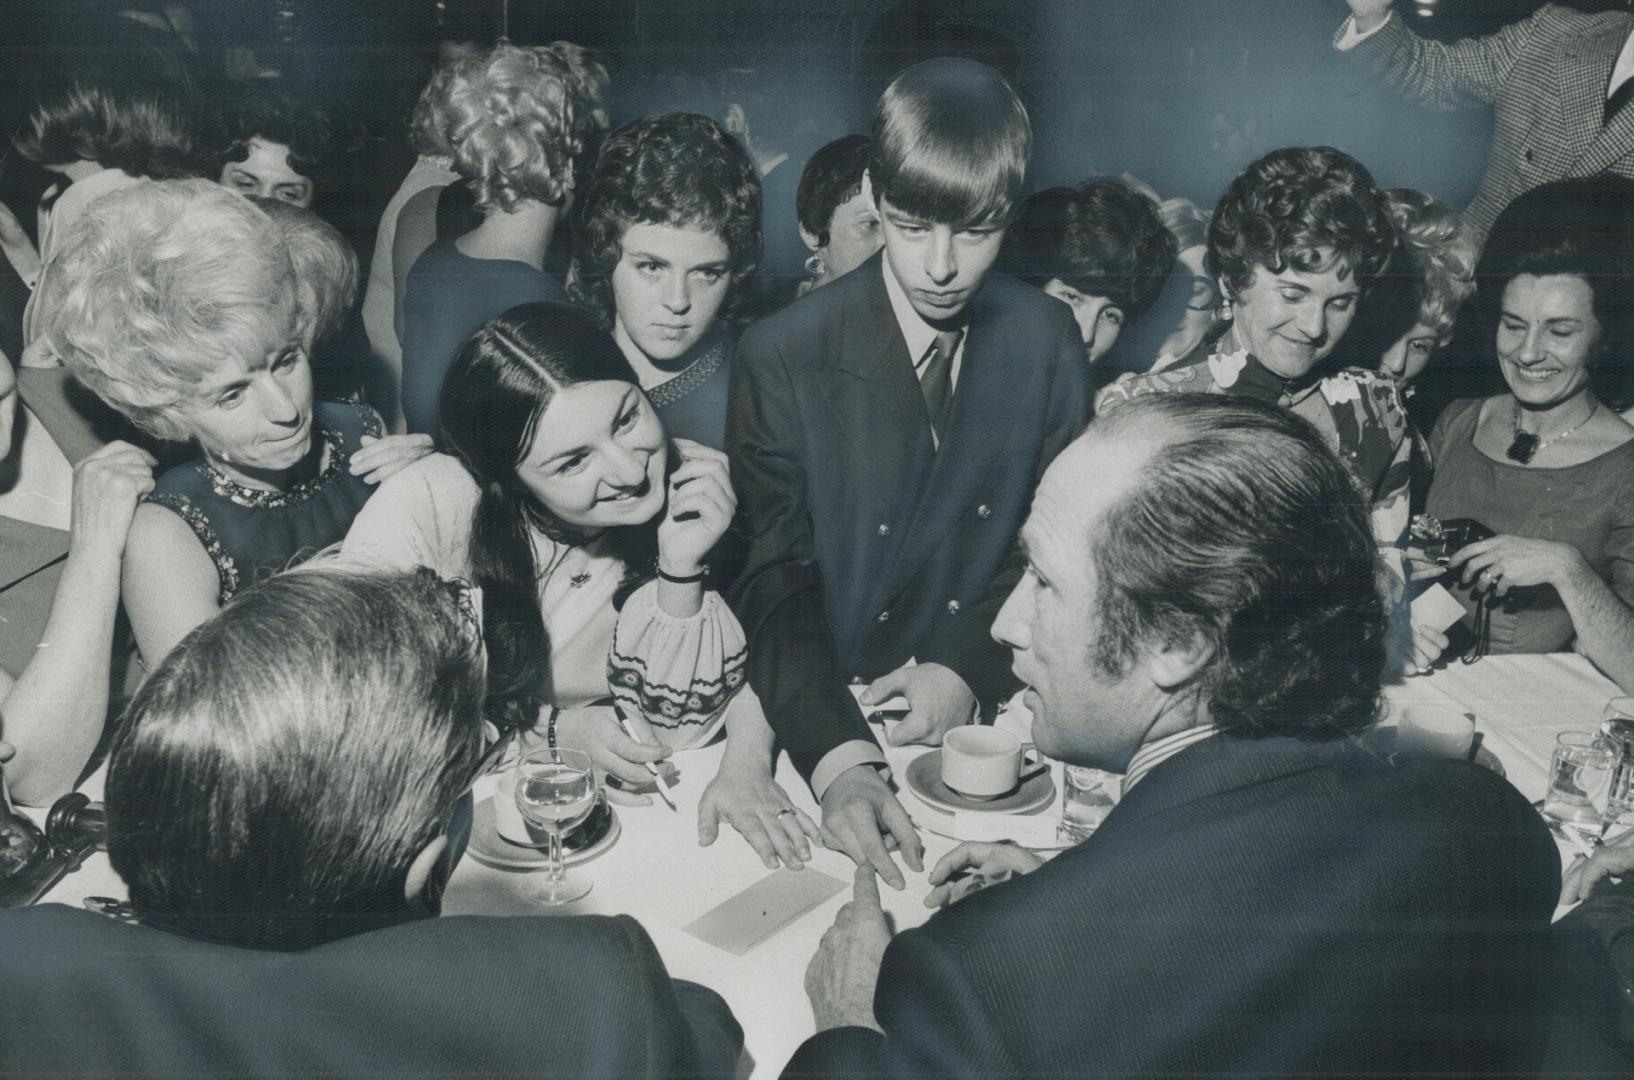 Autograph hunters crowd in tightly around table of Prime Minister Pierre Trudeau last night at Chamber of Commerce banquet in Niagara Falls